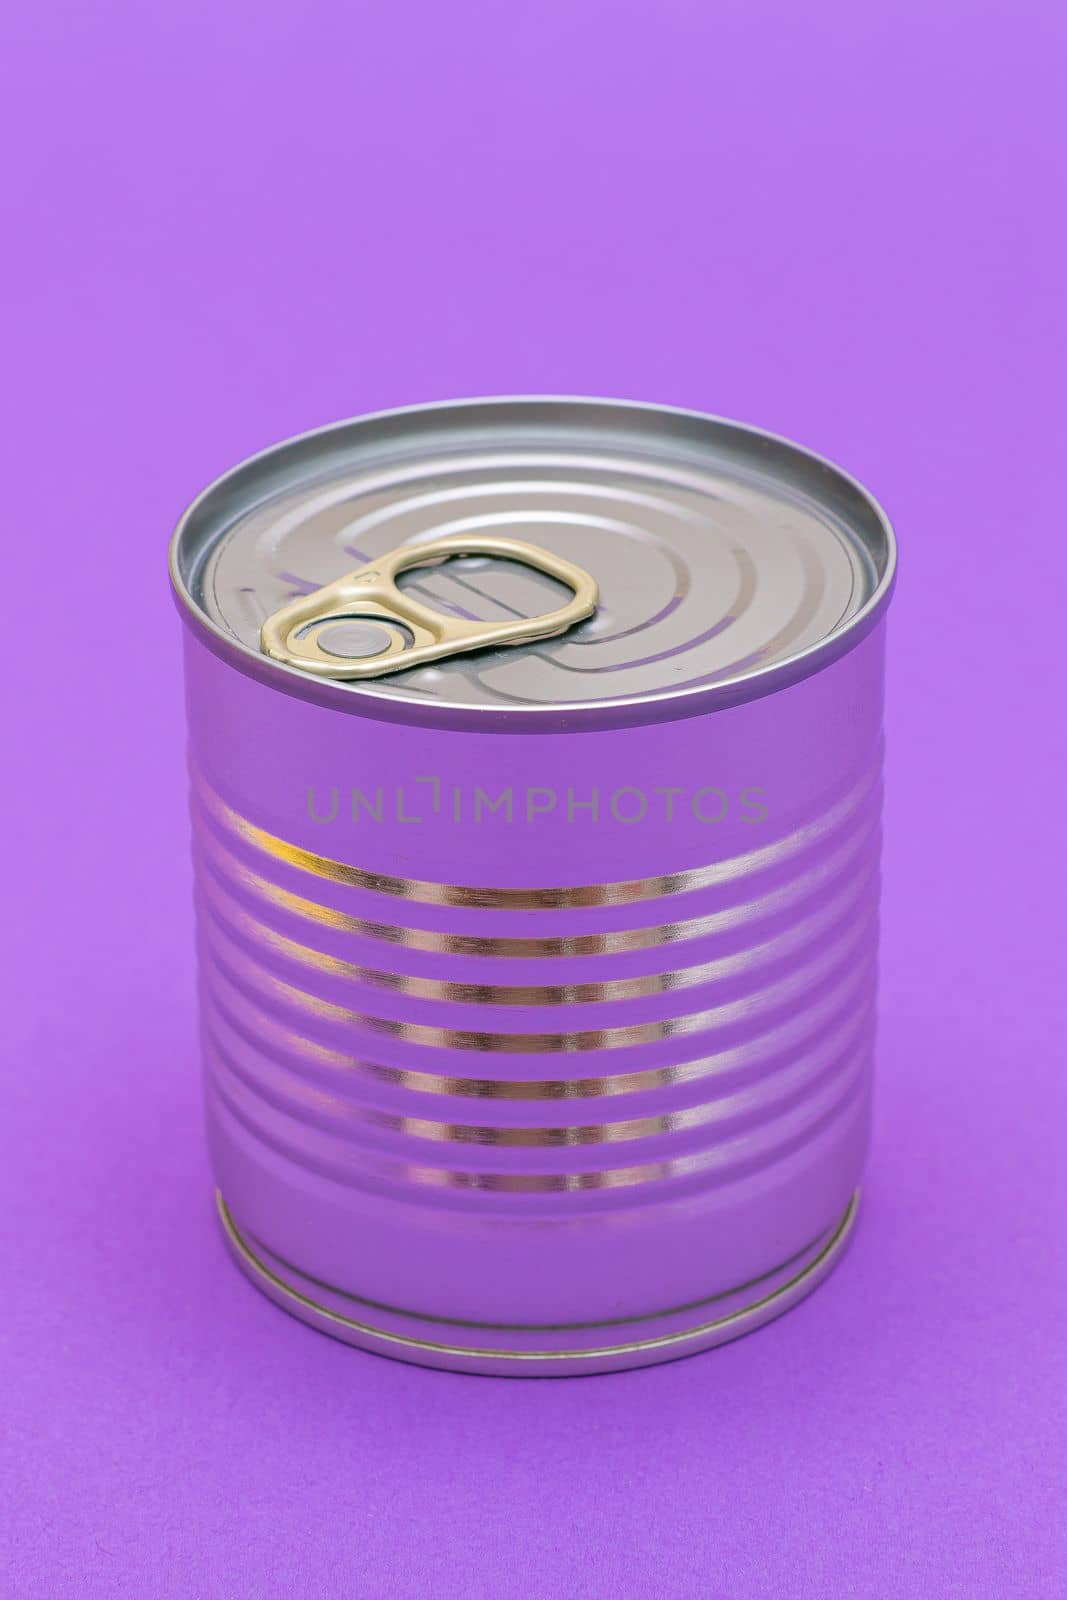 Unopened Tin Can with Blank Edge on Violet Background. Canned Food. Aluminum Can for Safe and Long Term Storage of Food. Steel Sealed Food Storage Container